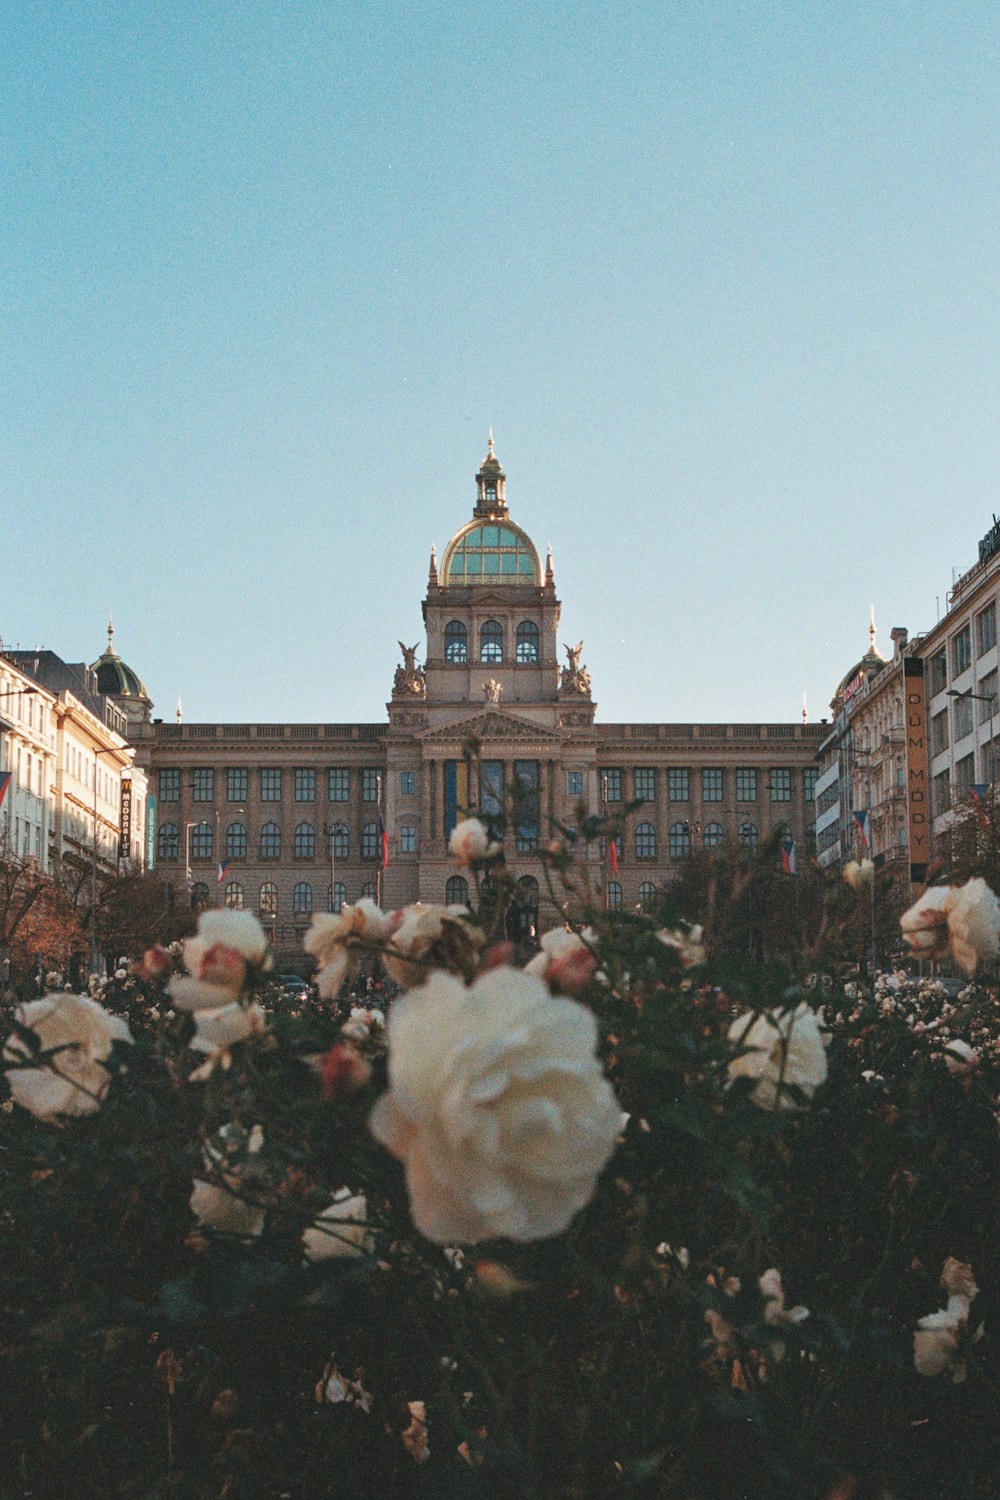 a building with many windows and flowers in front of it